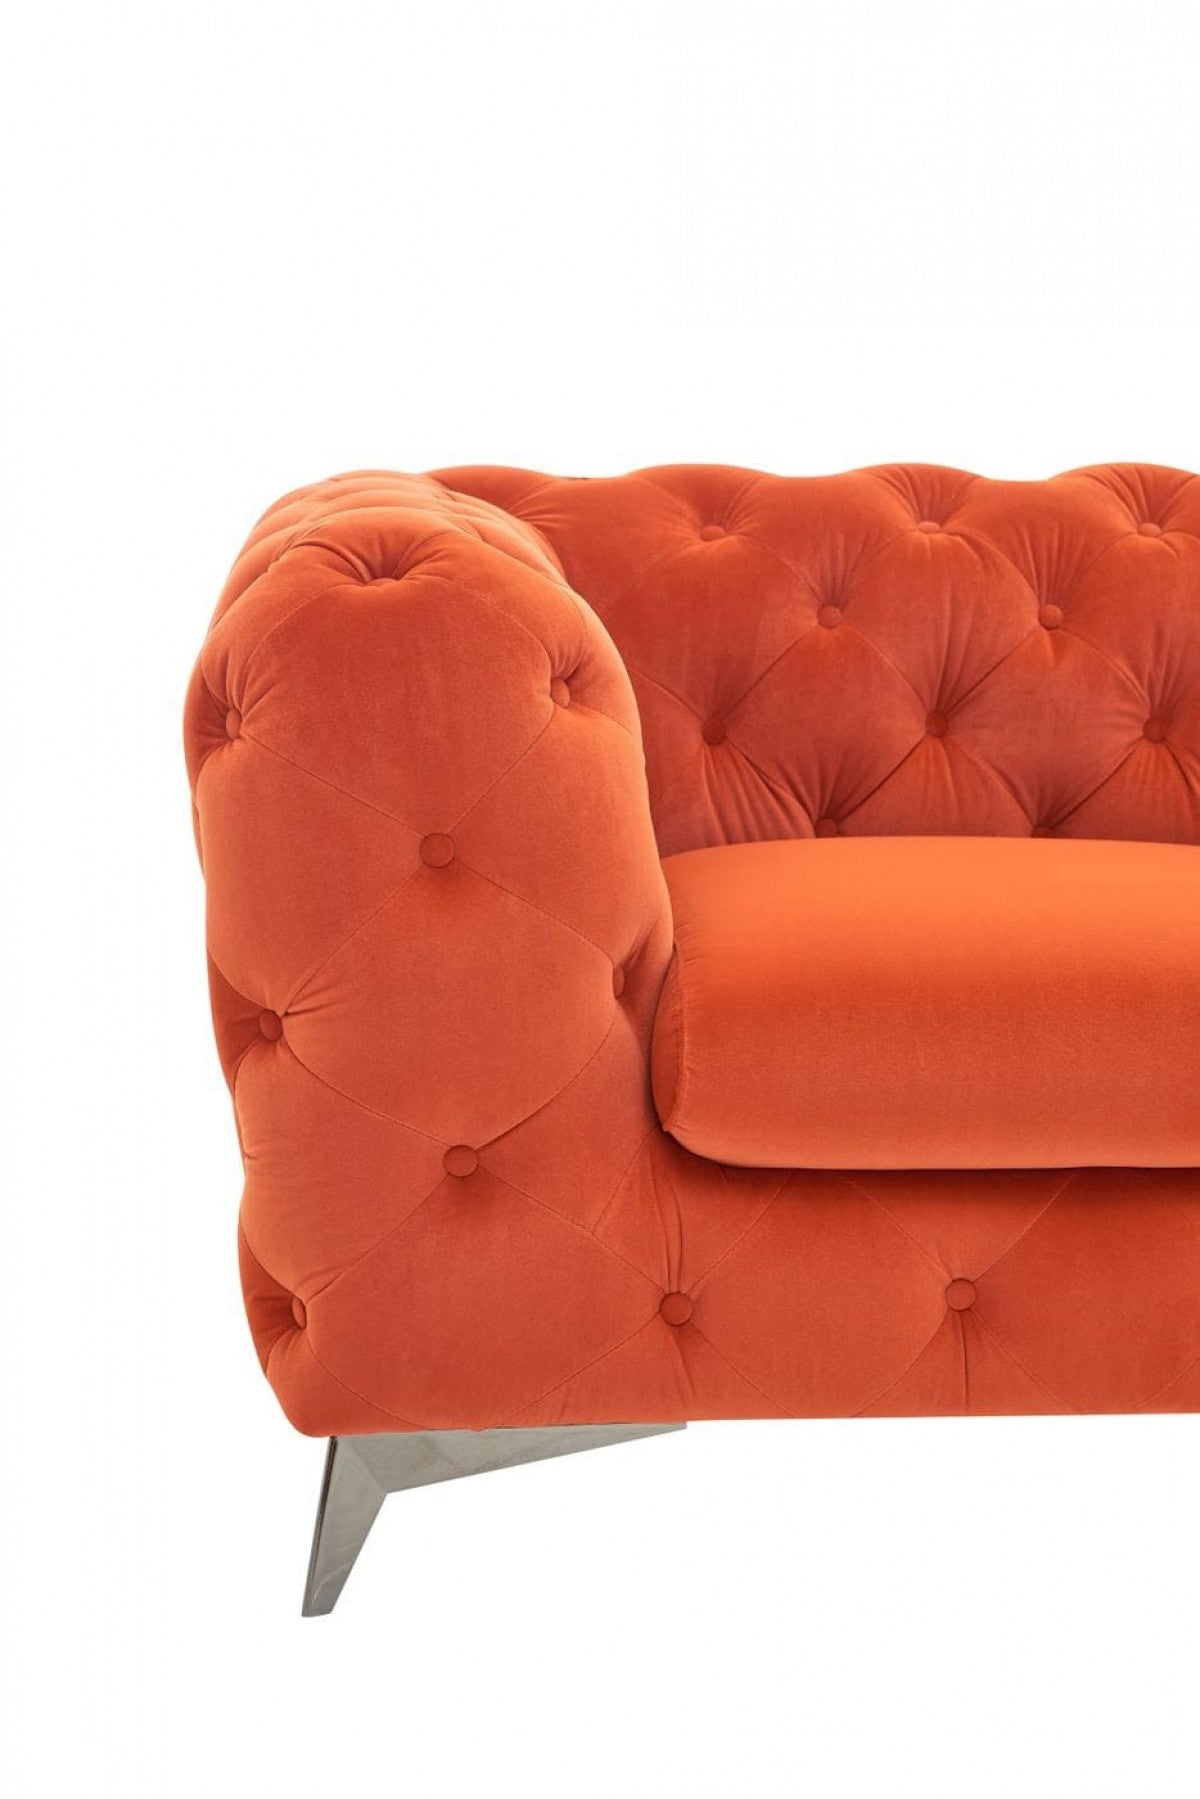 50" Orange Velvet And Silver Solid Color Chesterfield Chair